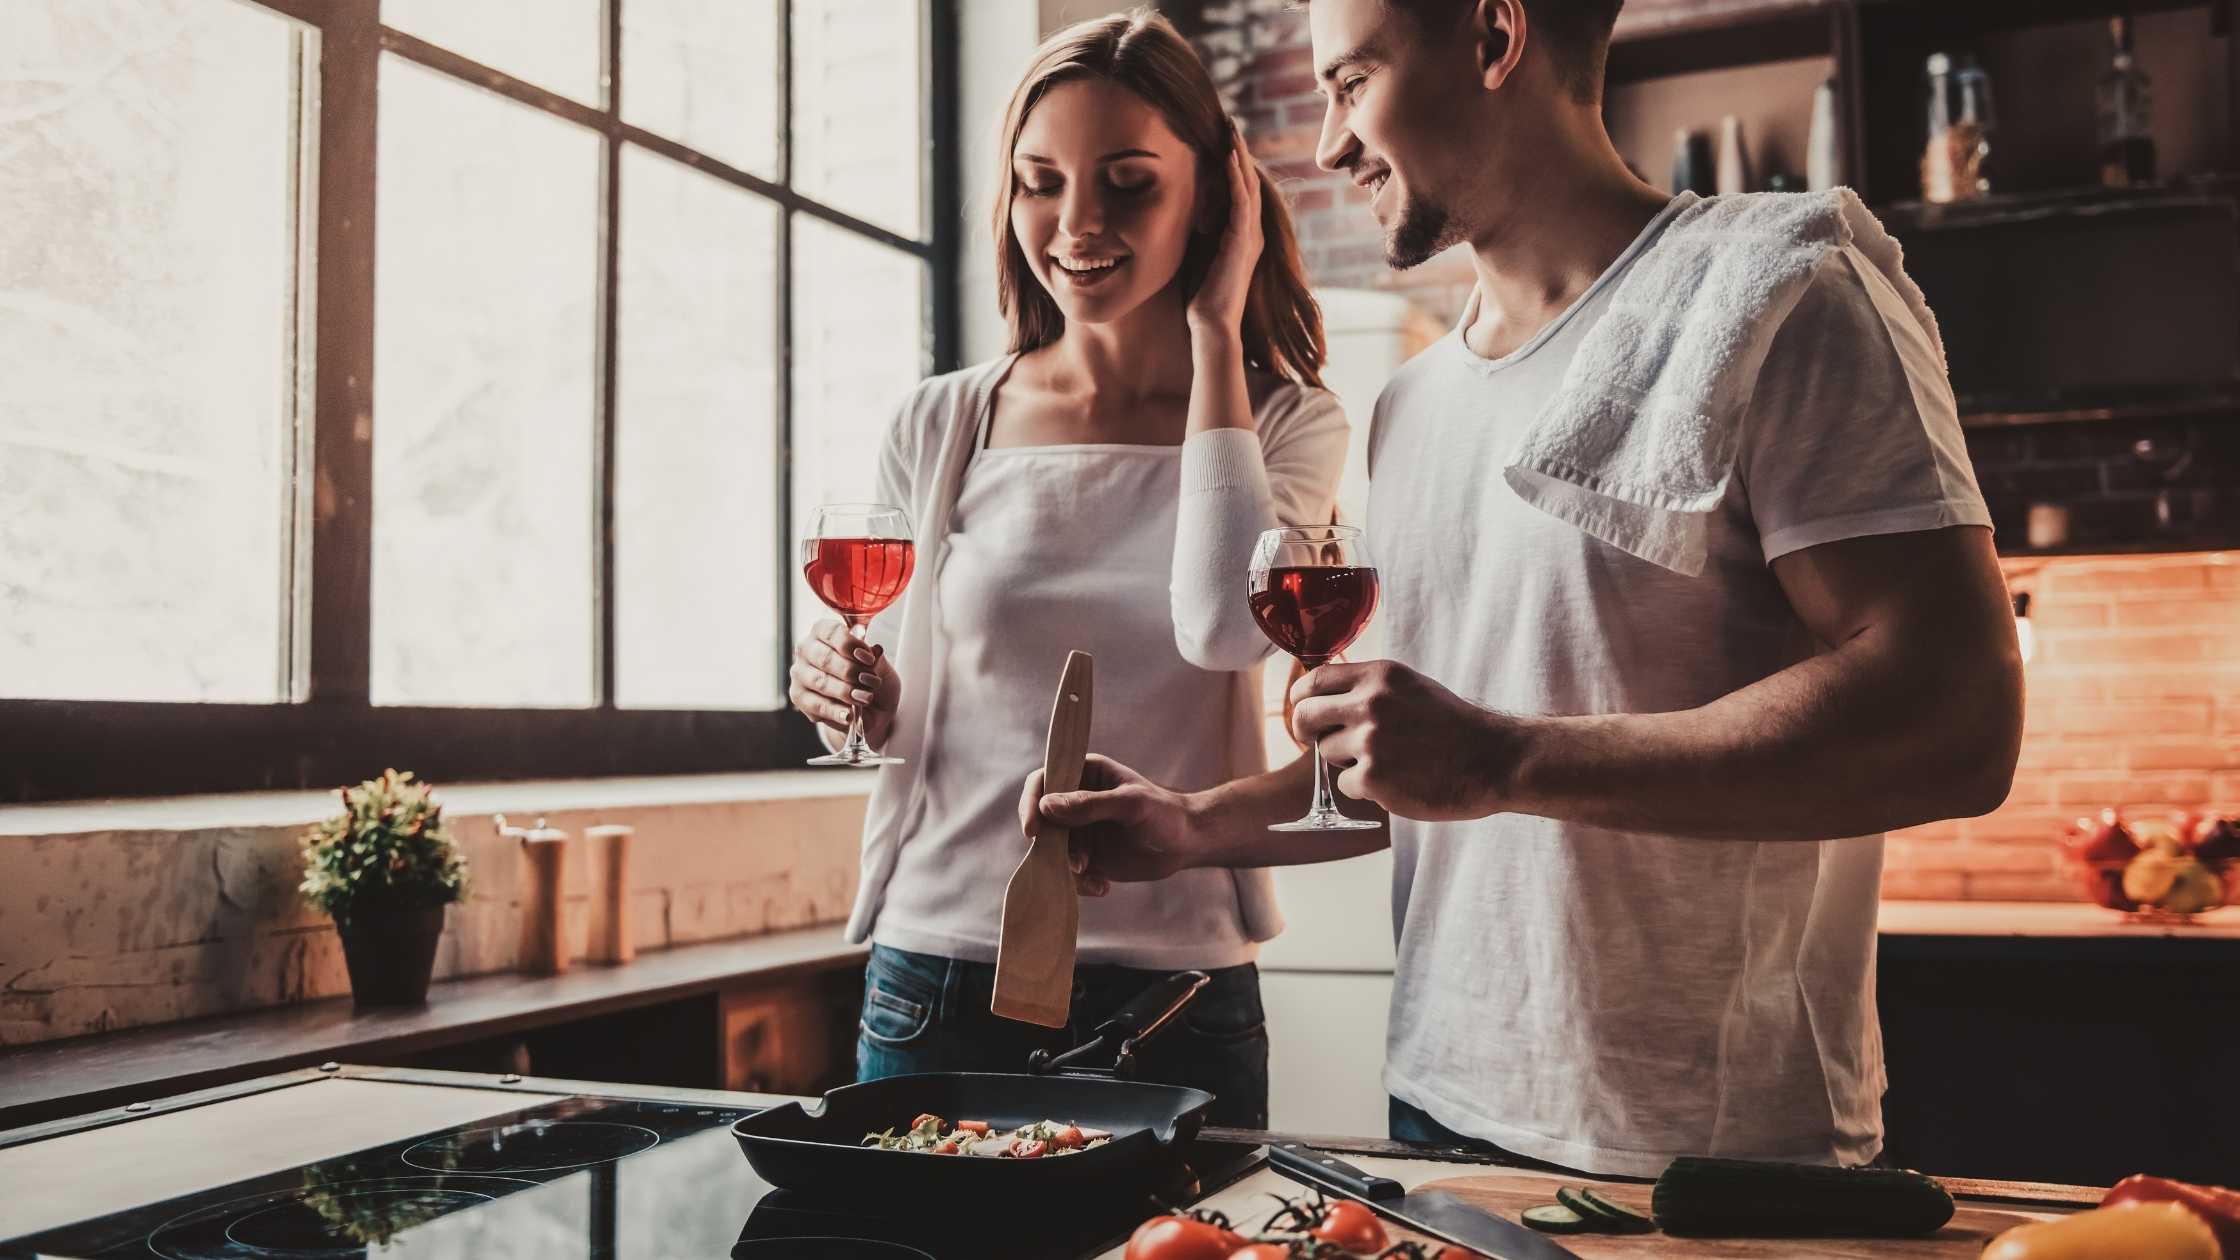 Couples cooking at home with wine in hand